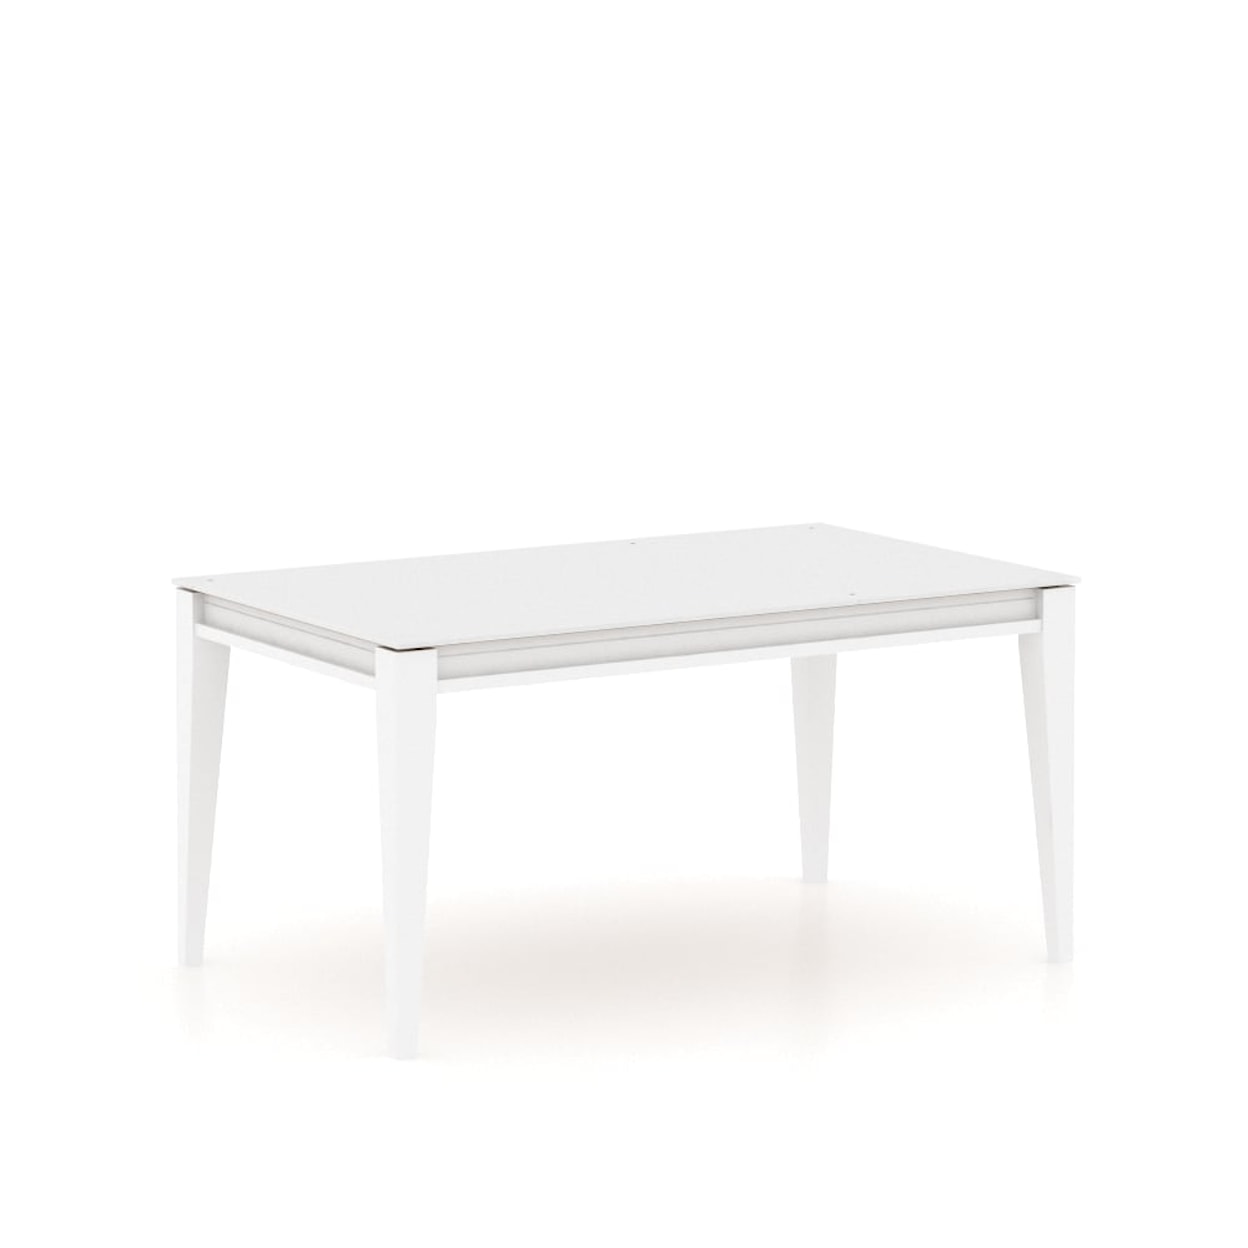 Canadel Gourmet Glass Top Dining Table